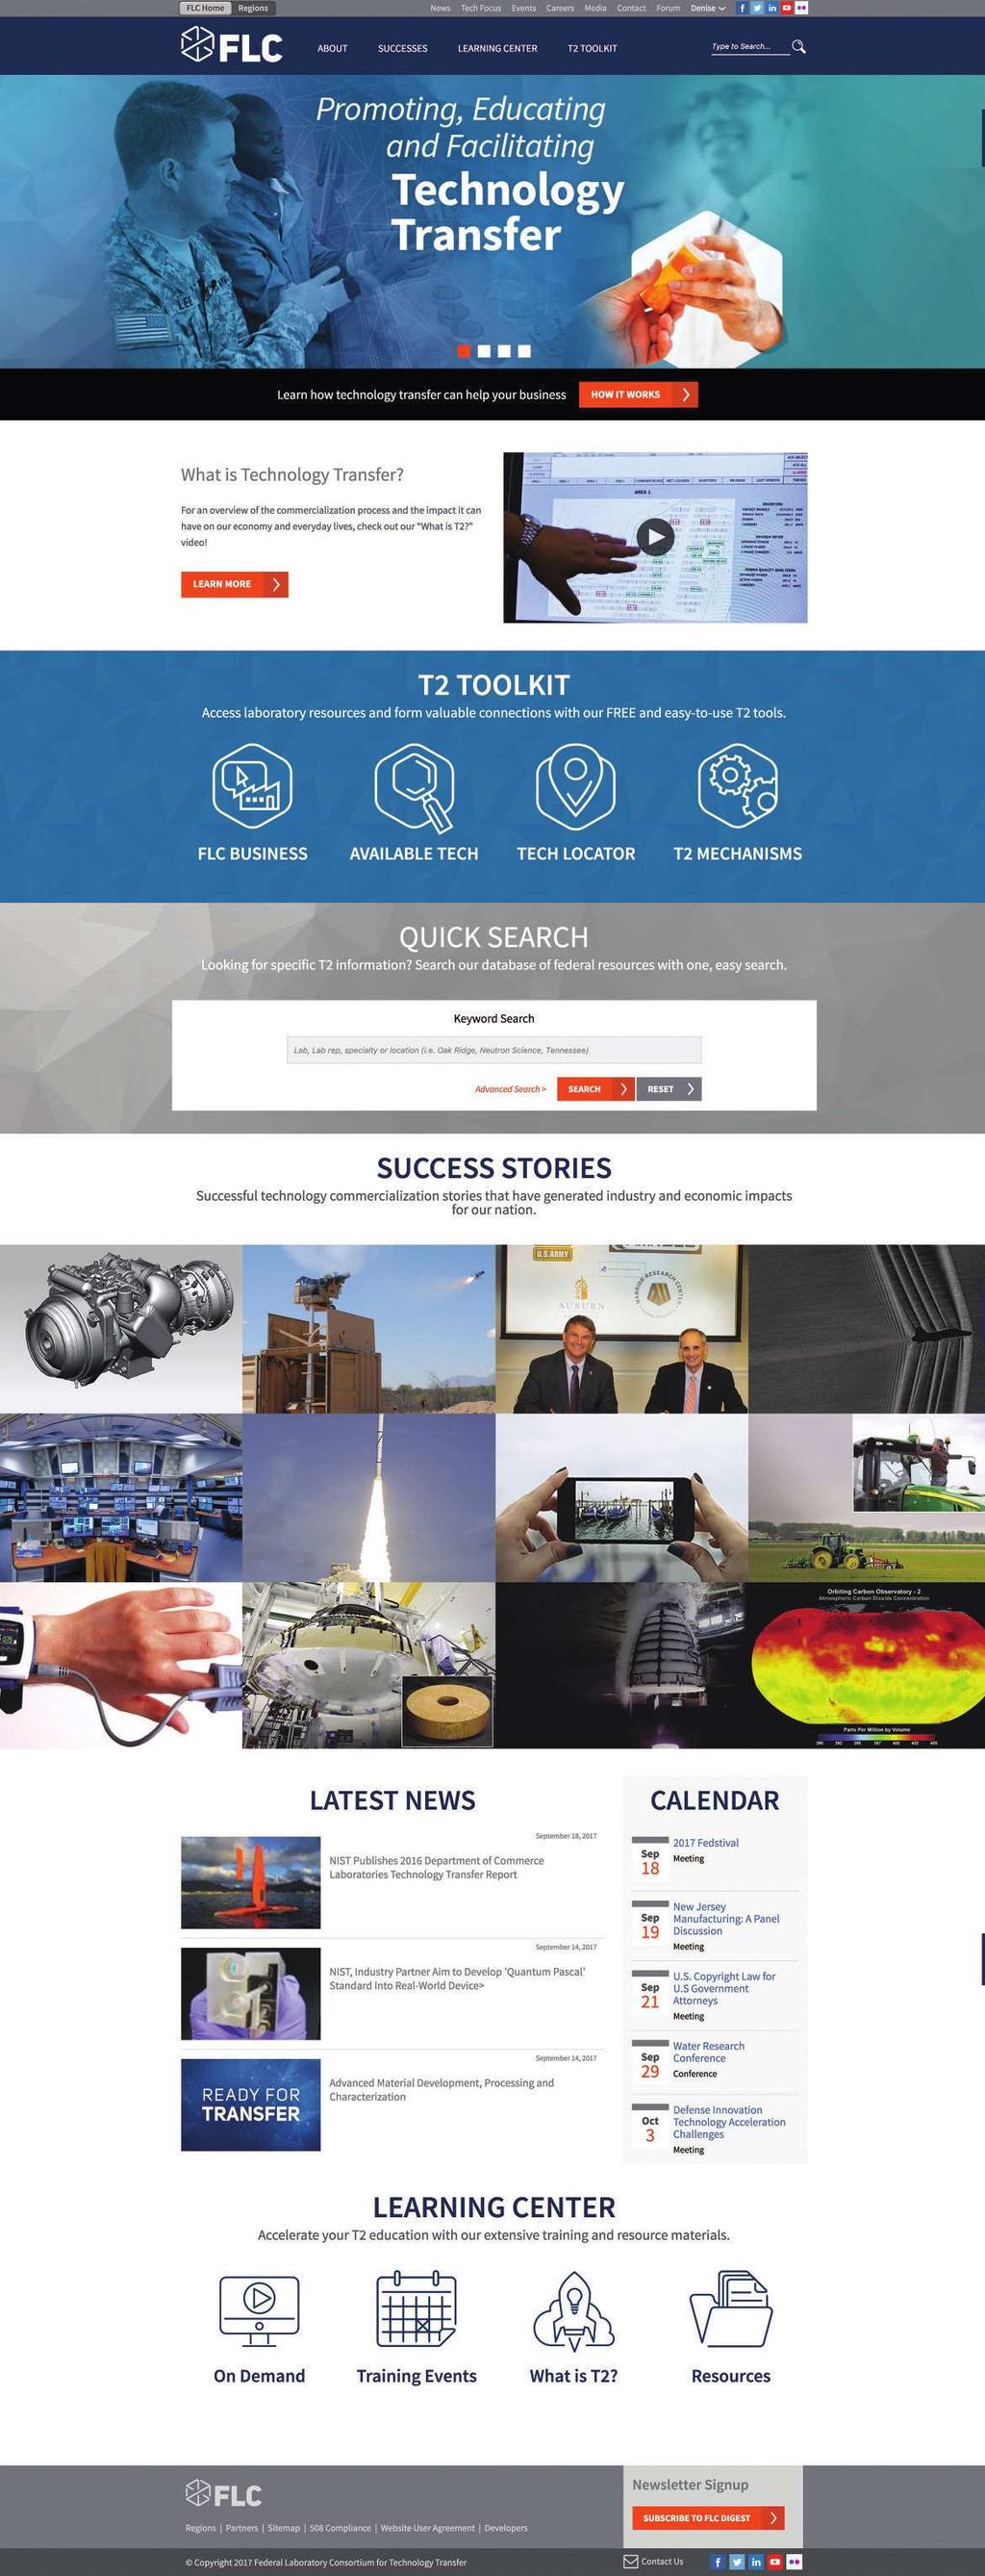 On-Demand Training Success Stories Educational Resources Awards Lab Profile